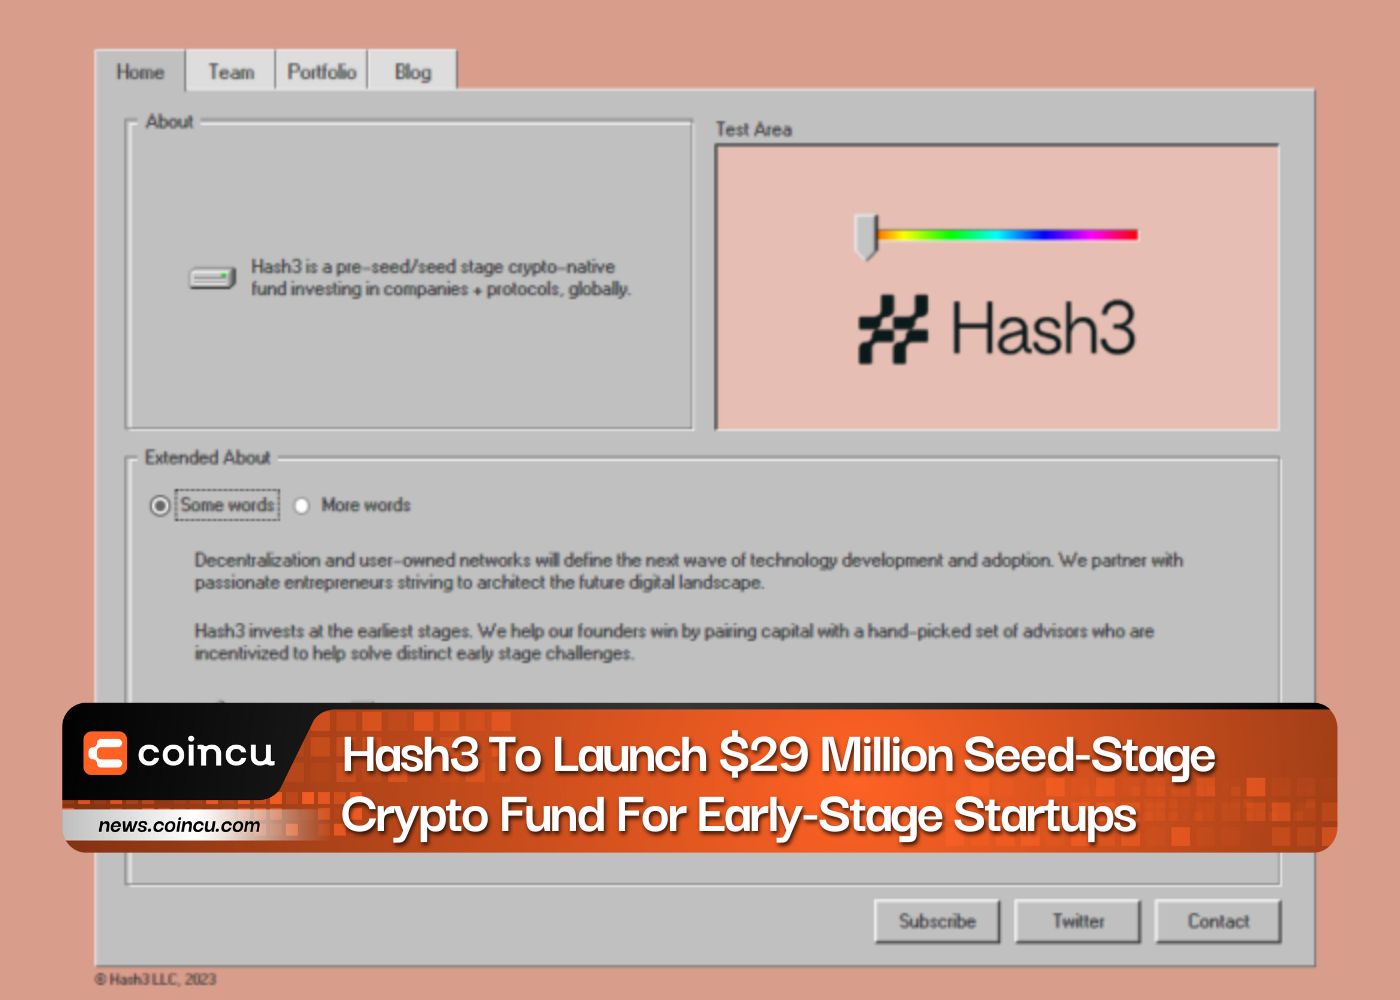 Hash3 To Launch $29 Million Seed-Stage Crypto Fund For Early-Stage Startups